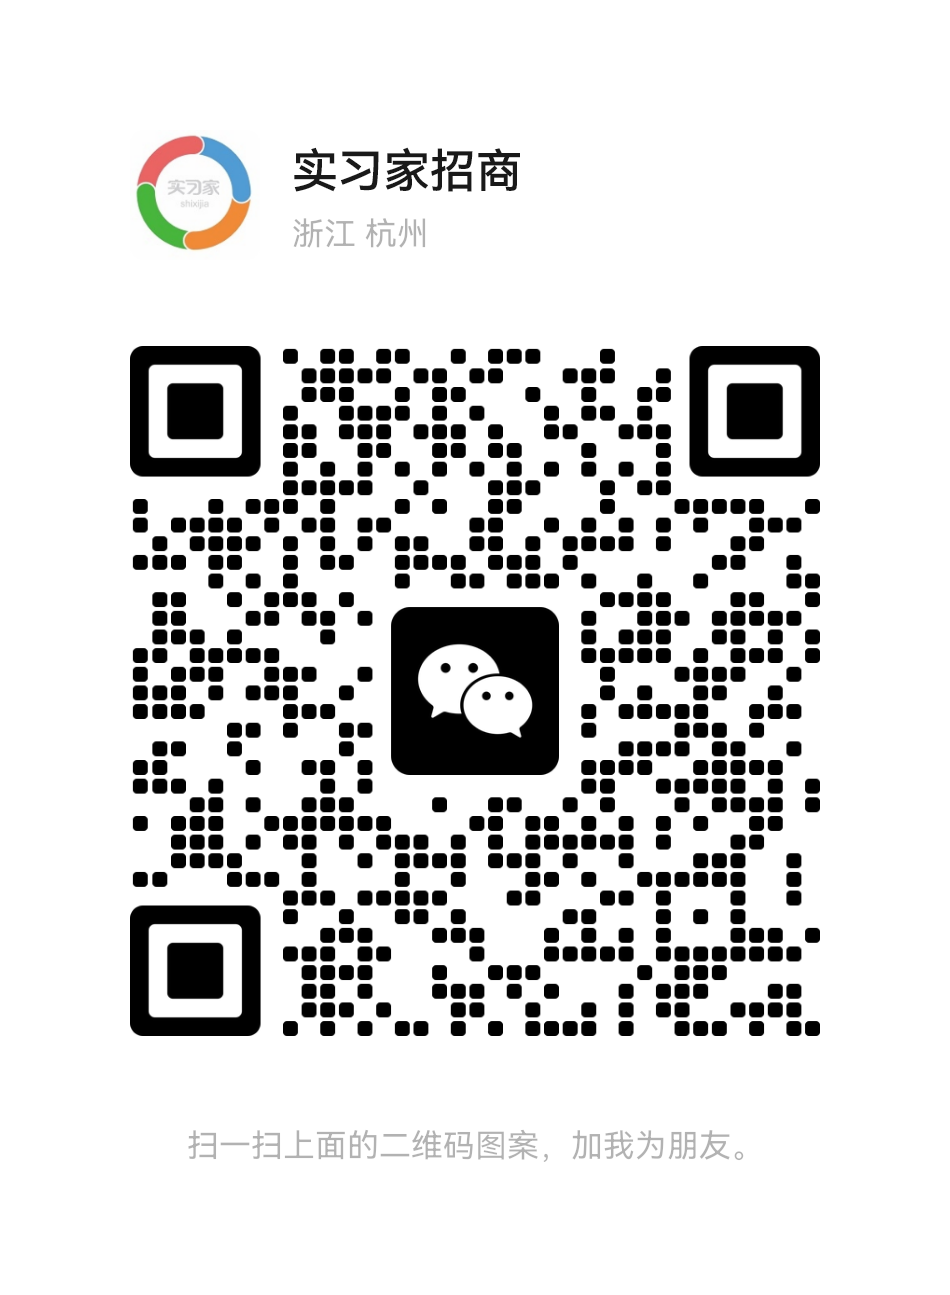 mmqrcode1668761482639.png